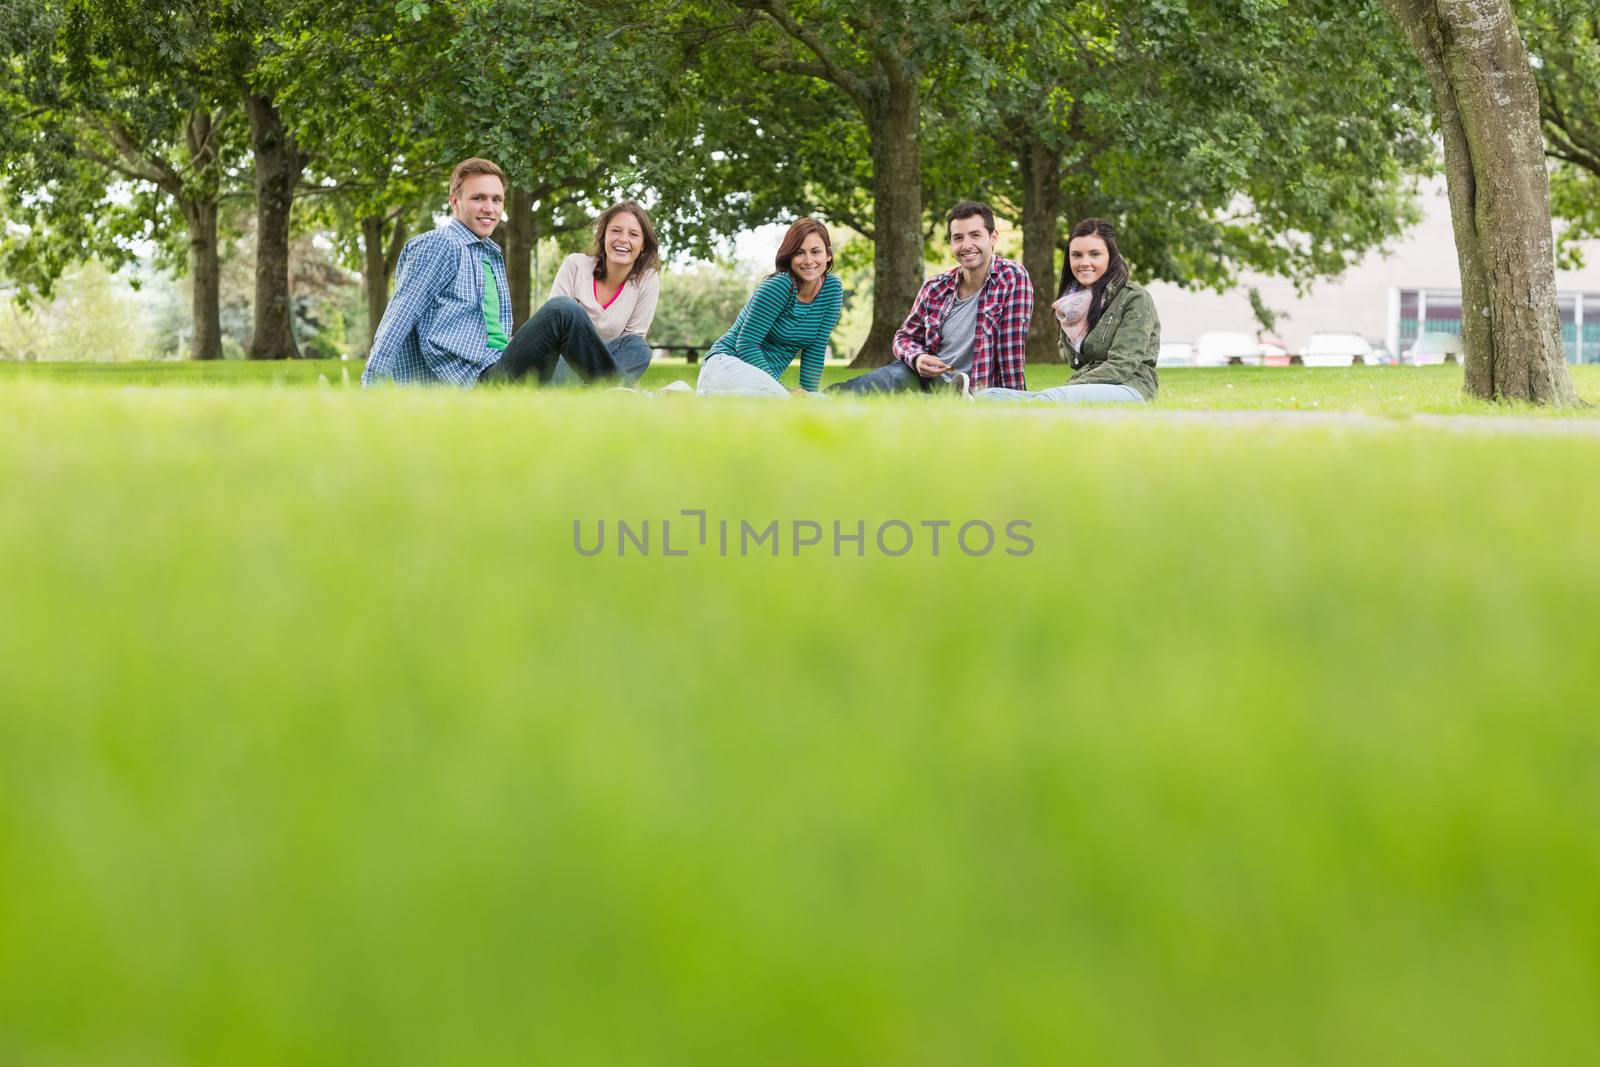 Group portrait of young college students sitting on grass in the park